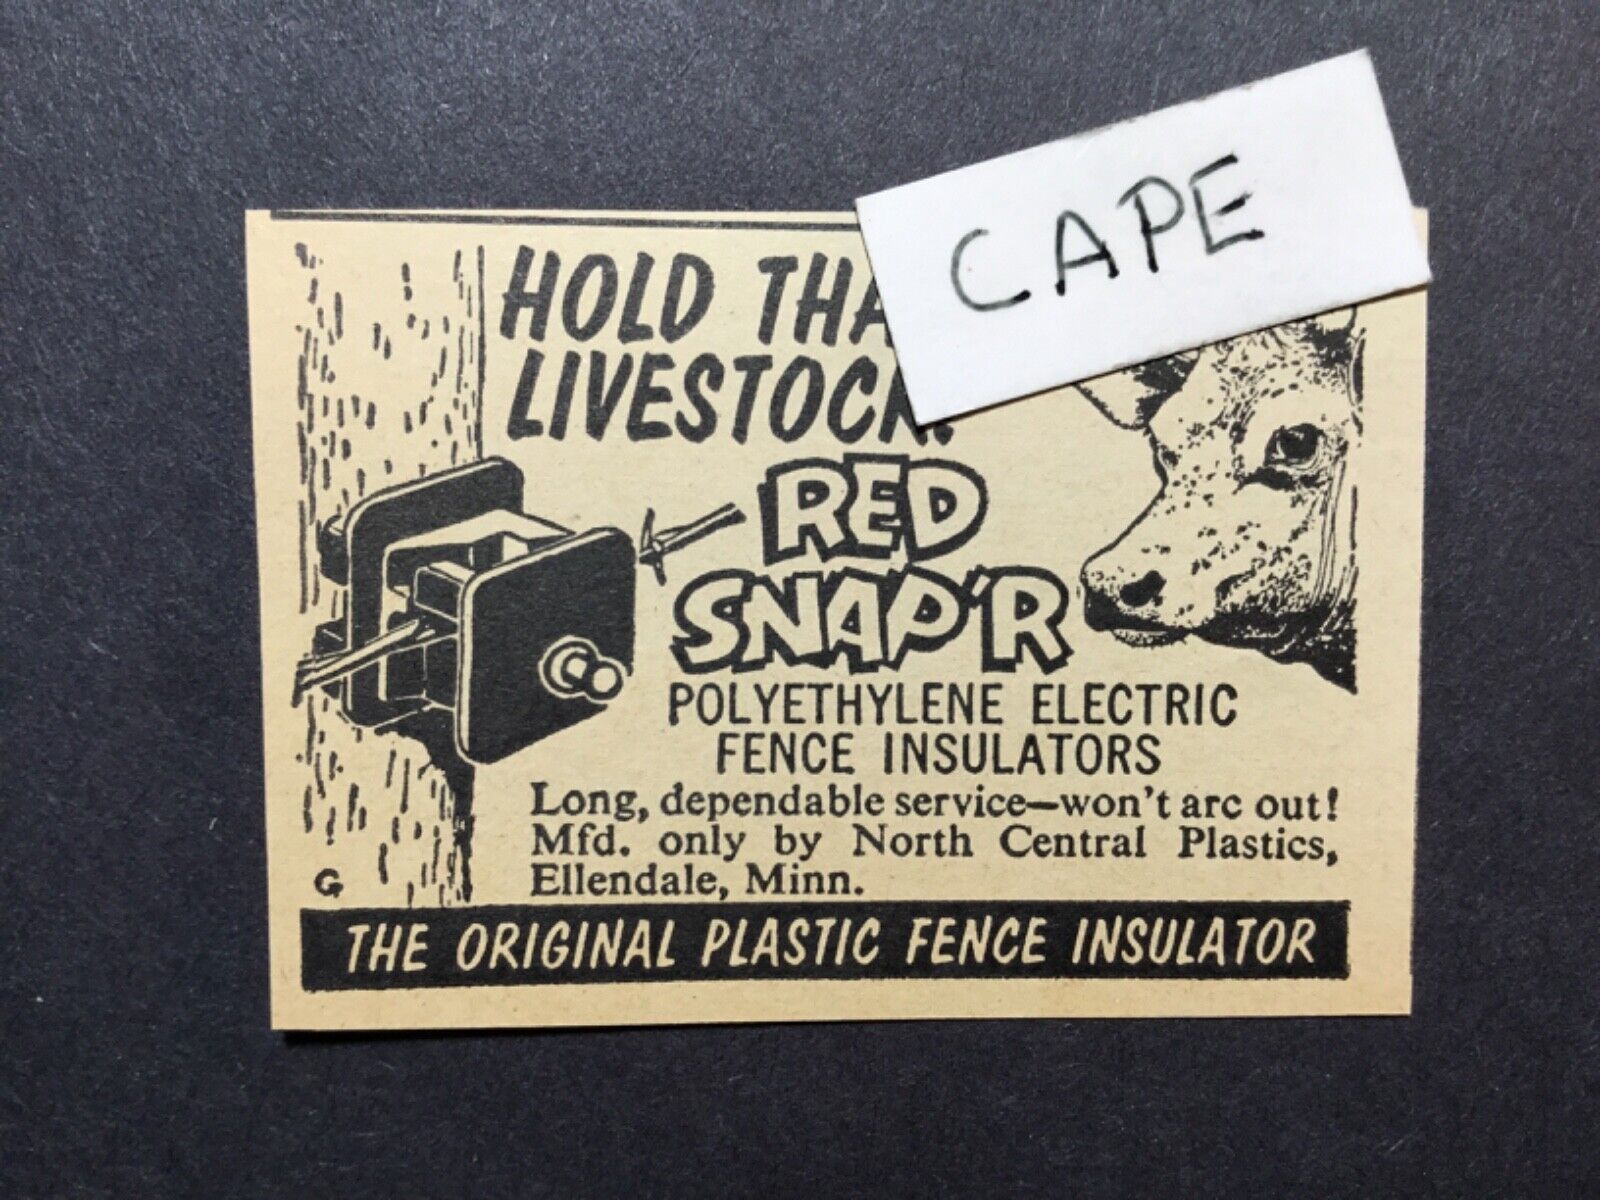 1965 Ad. Red Snap’r electric fence insulator. North Central Plastics. Ellendale.